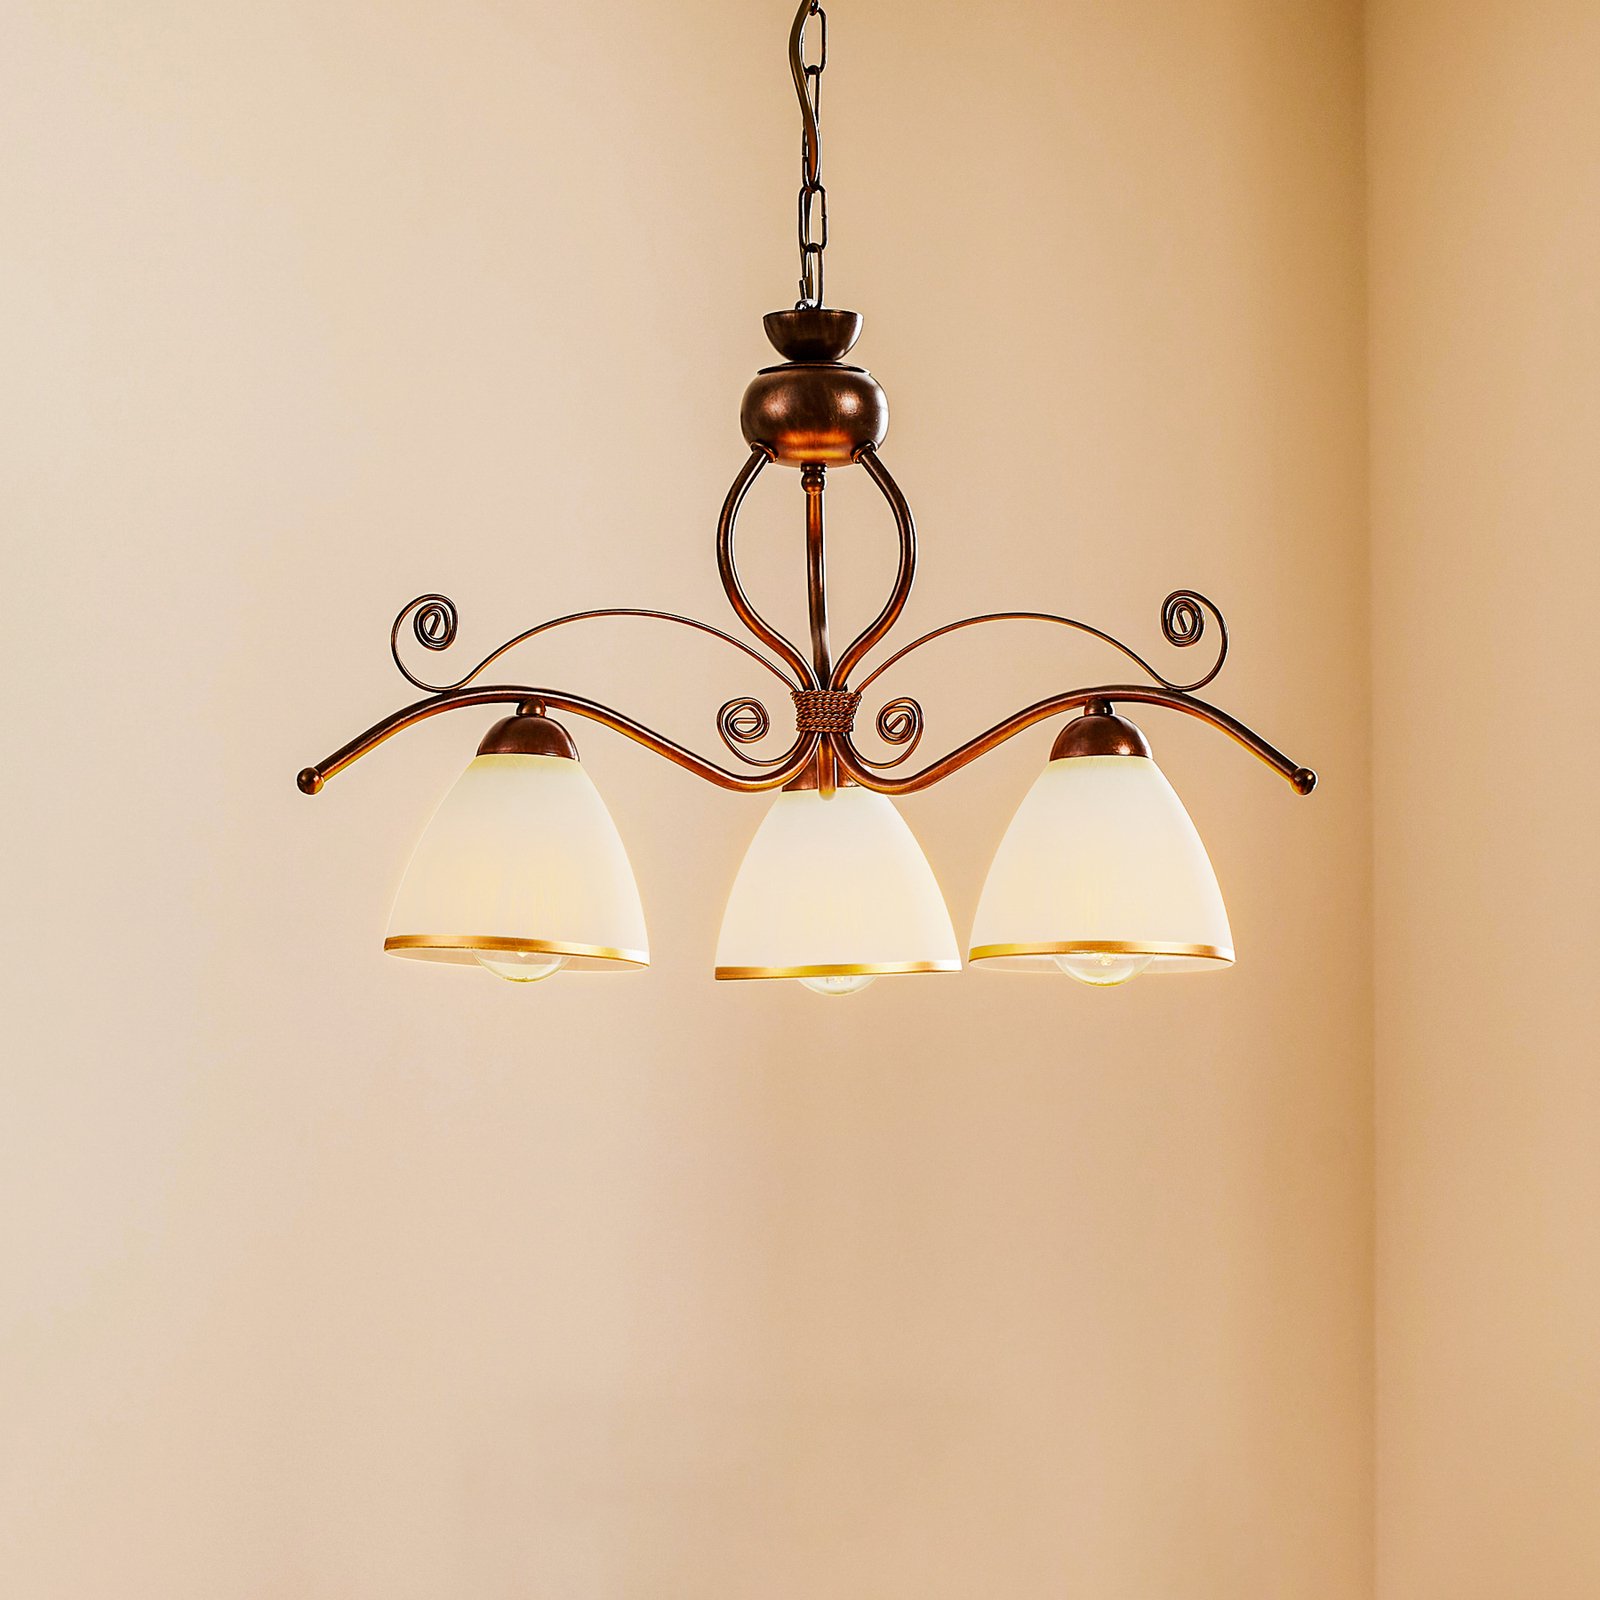 Roma hanging light in white and brown, three-bulb